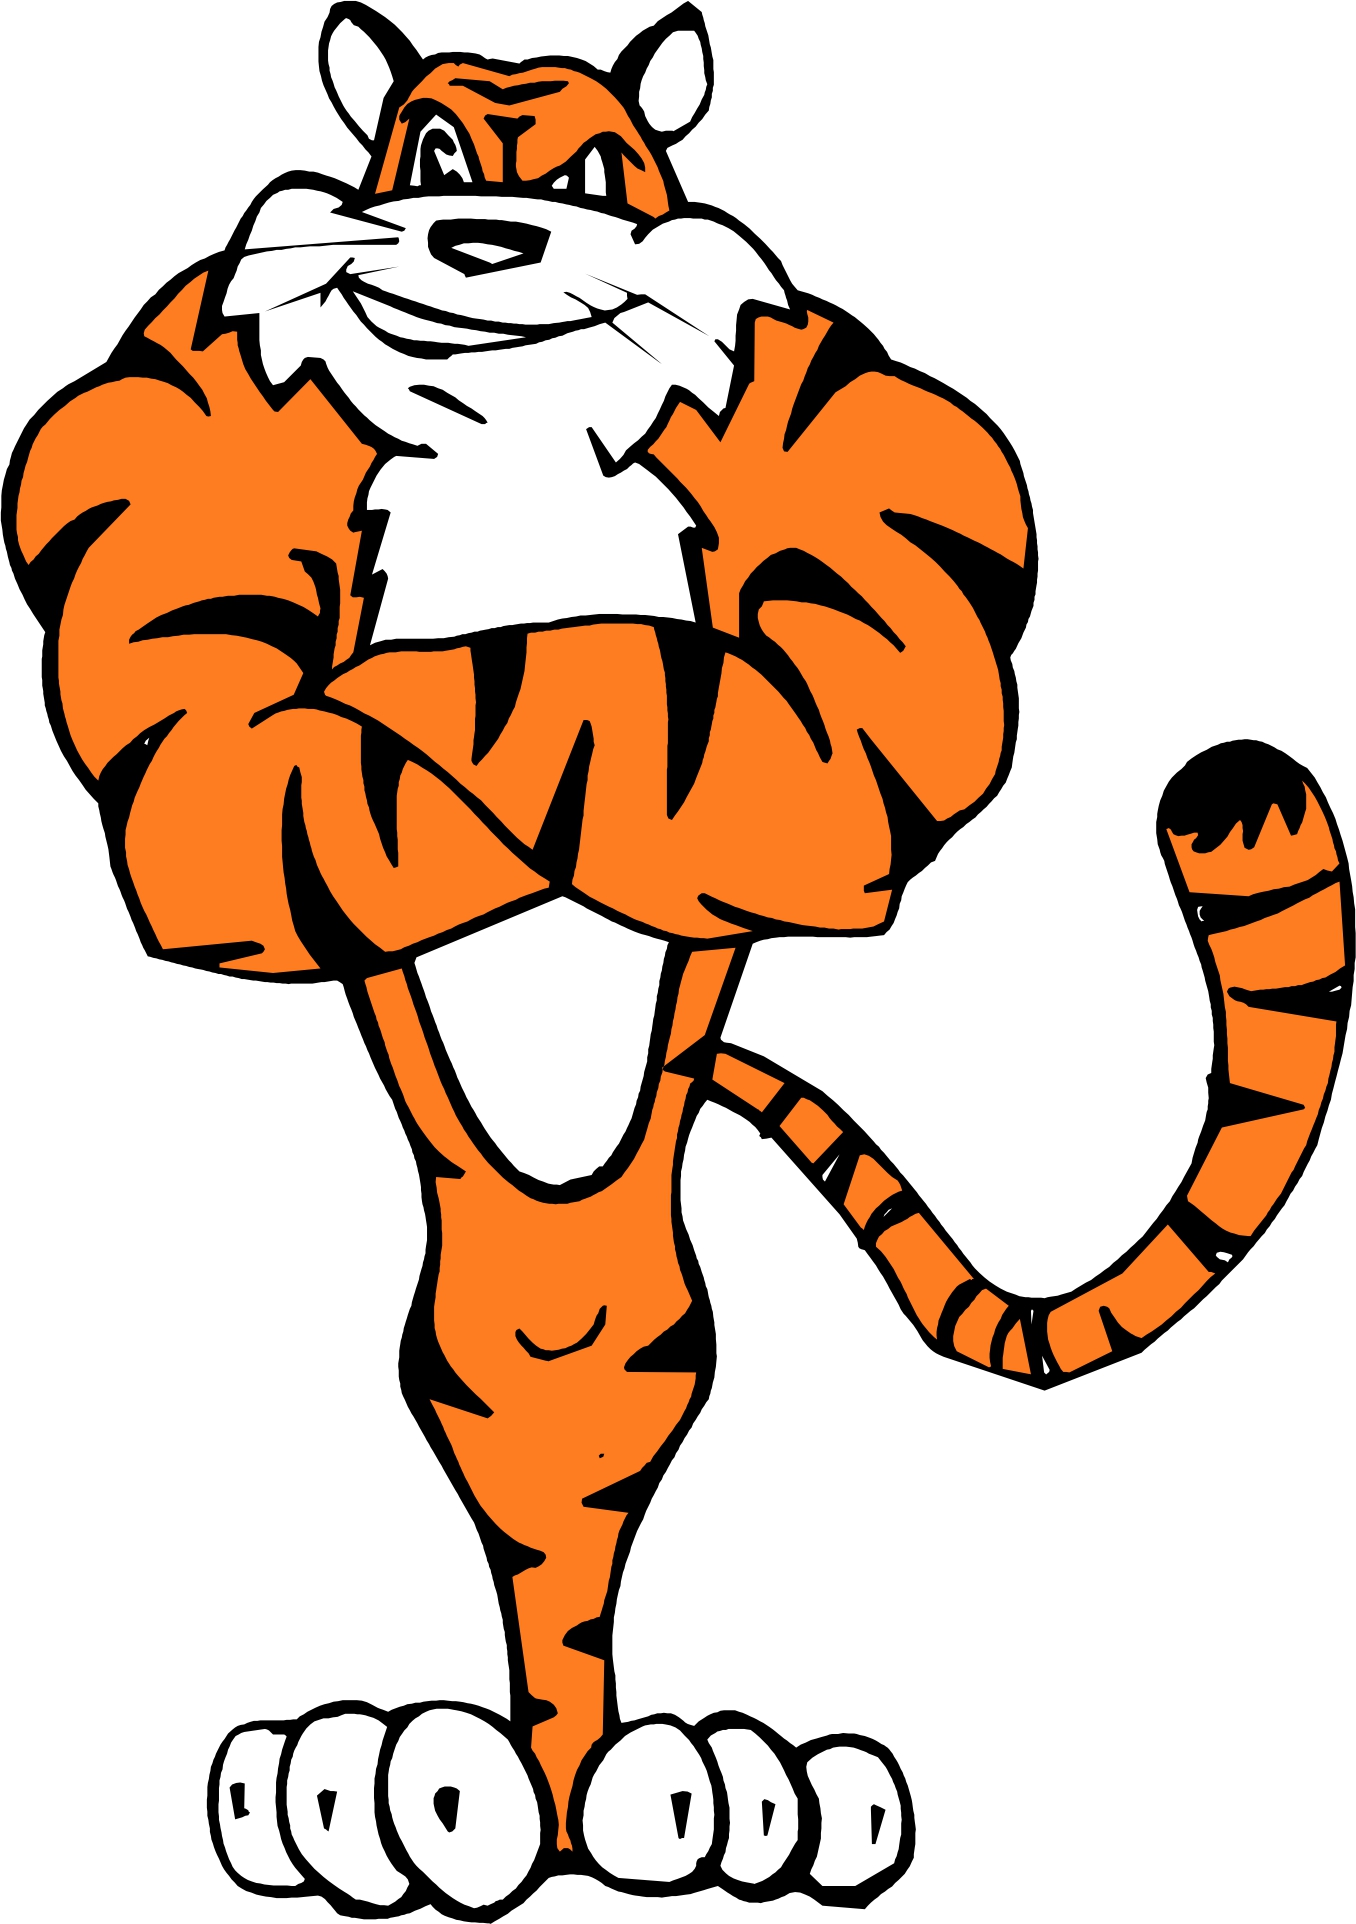 Cool Tiger Pictures Cartoon - ClipArt Best